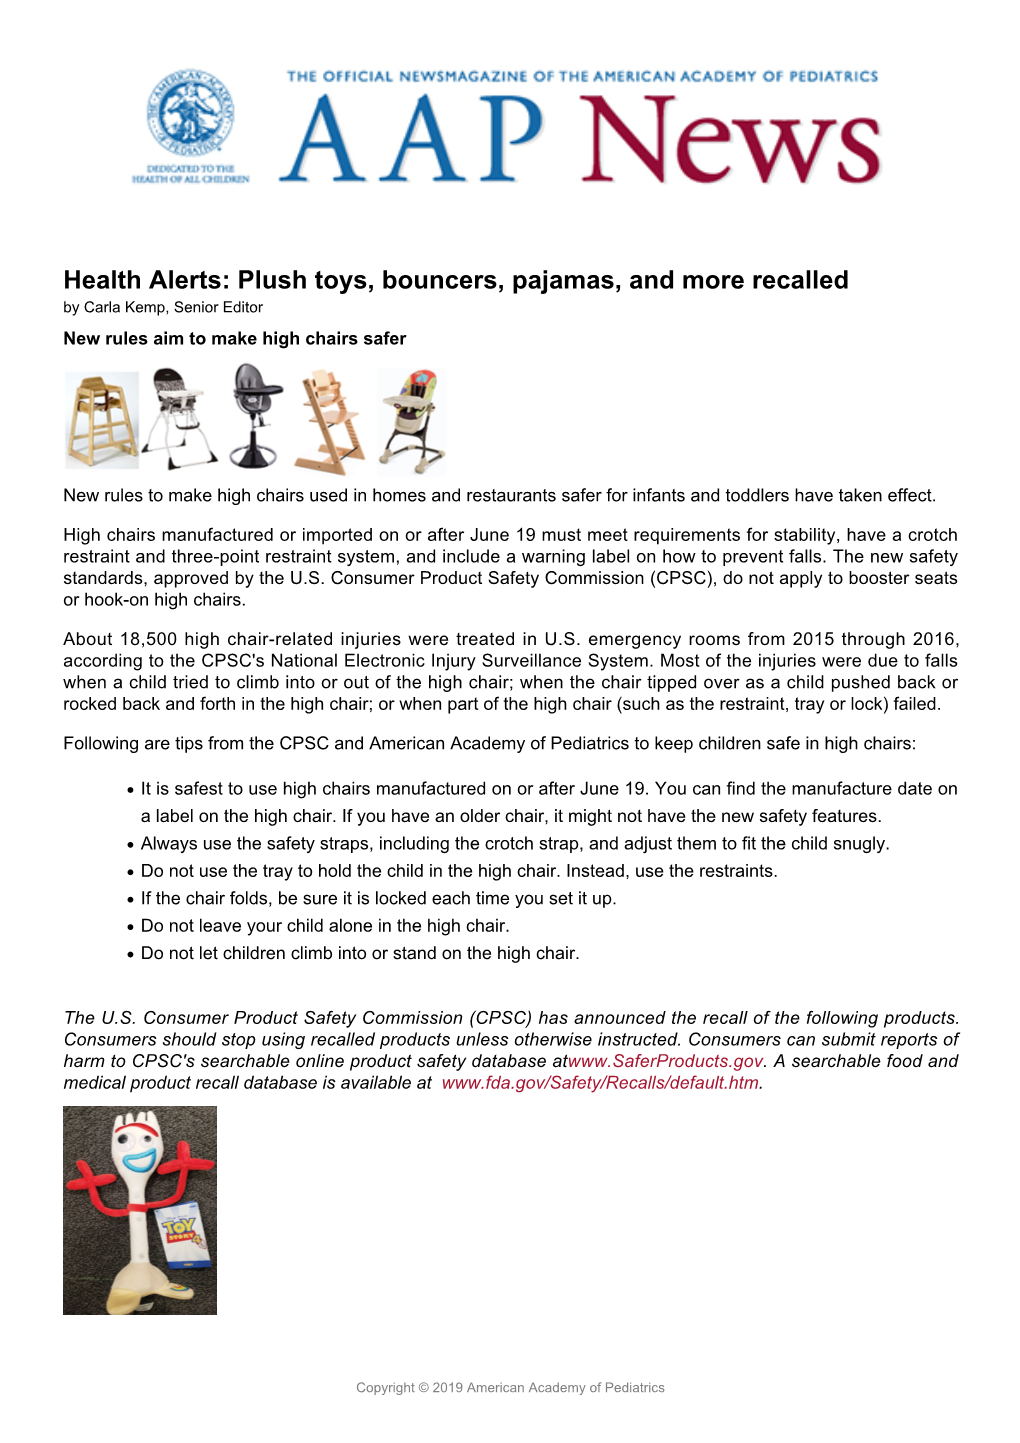 Health Alerts: Plush Toys, Bouncers, Pajamas, and More Recalled by Carla Kemp, Senior Editor New Rules Aim to Make High Chairs Safer